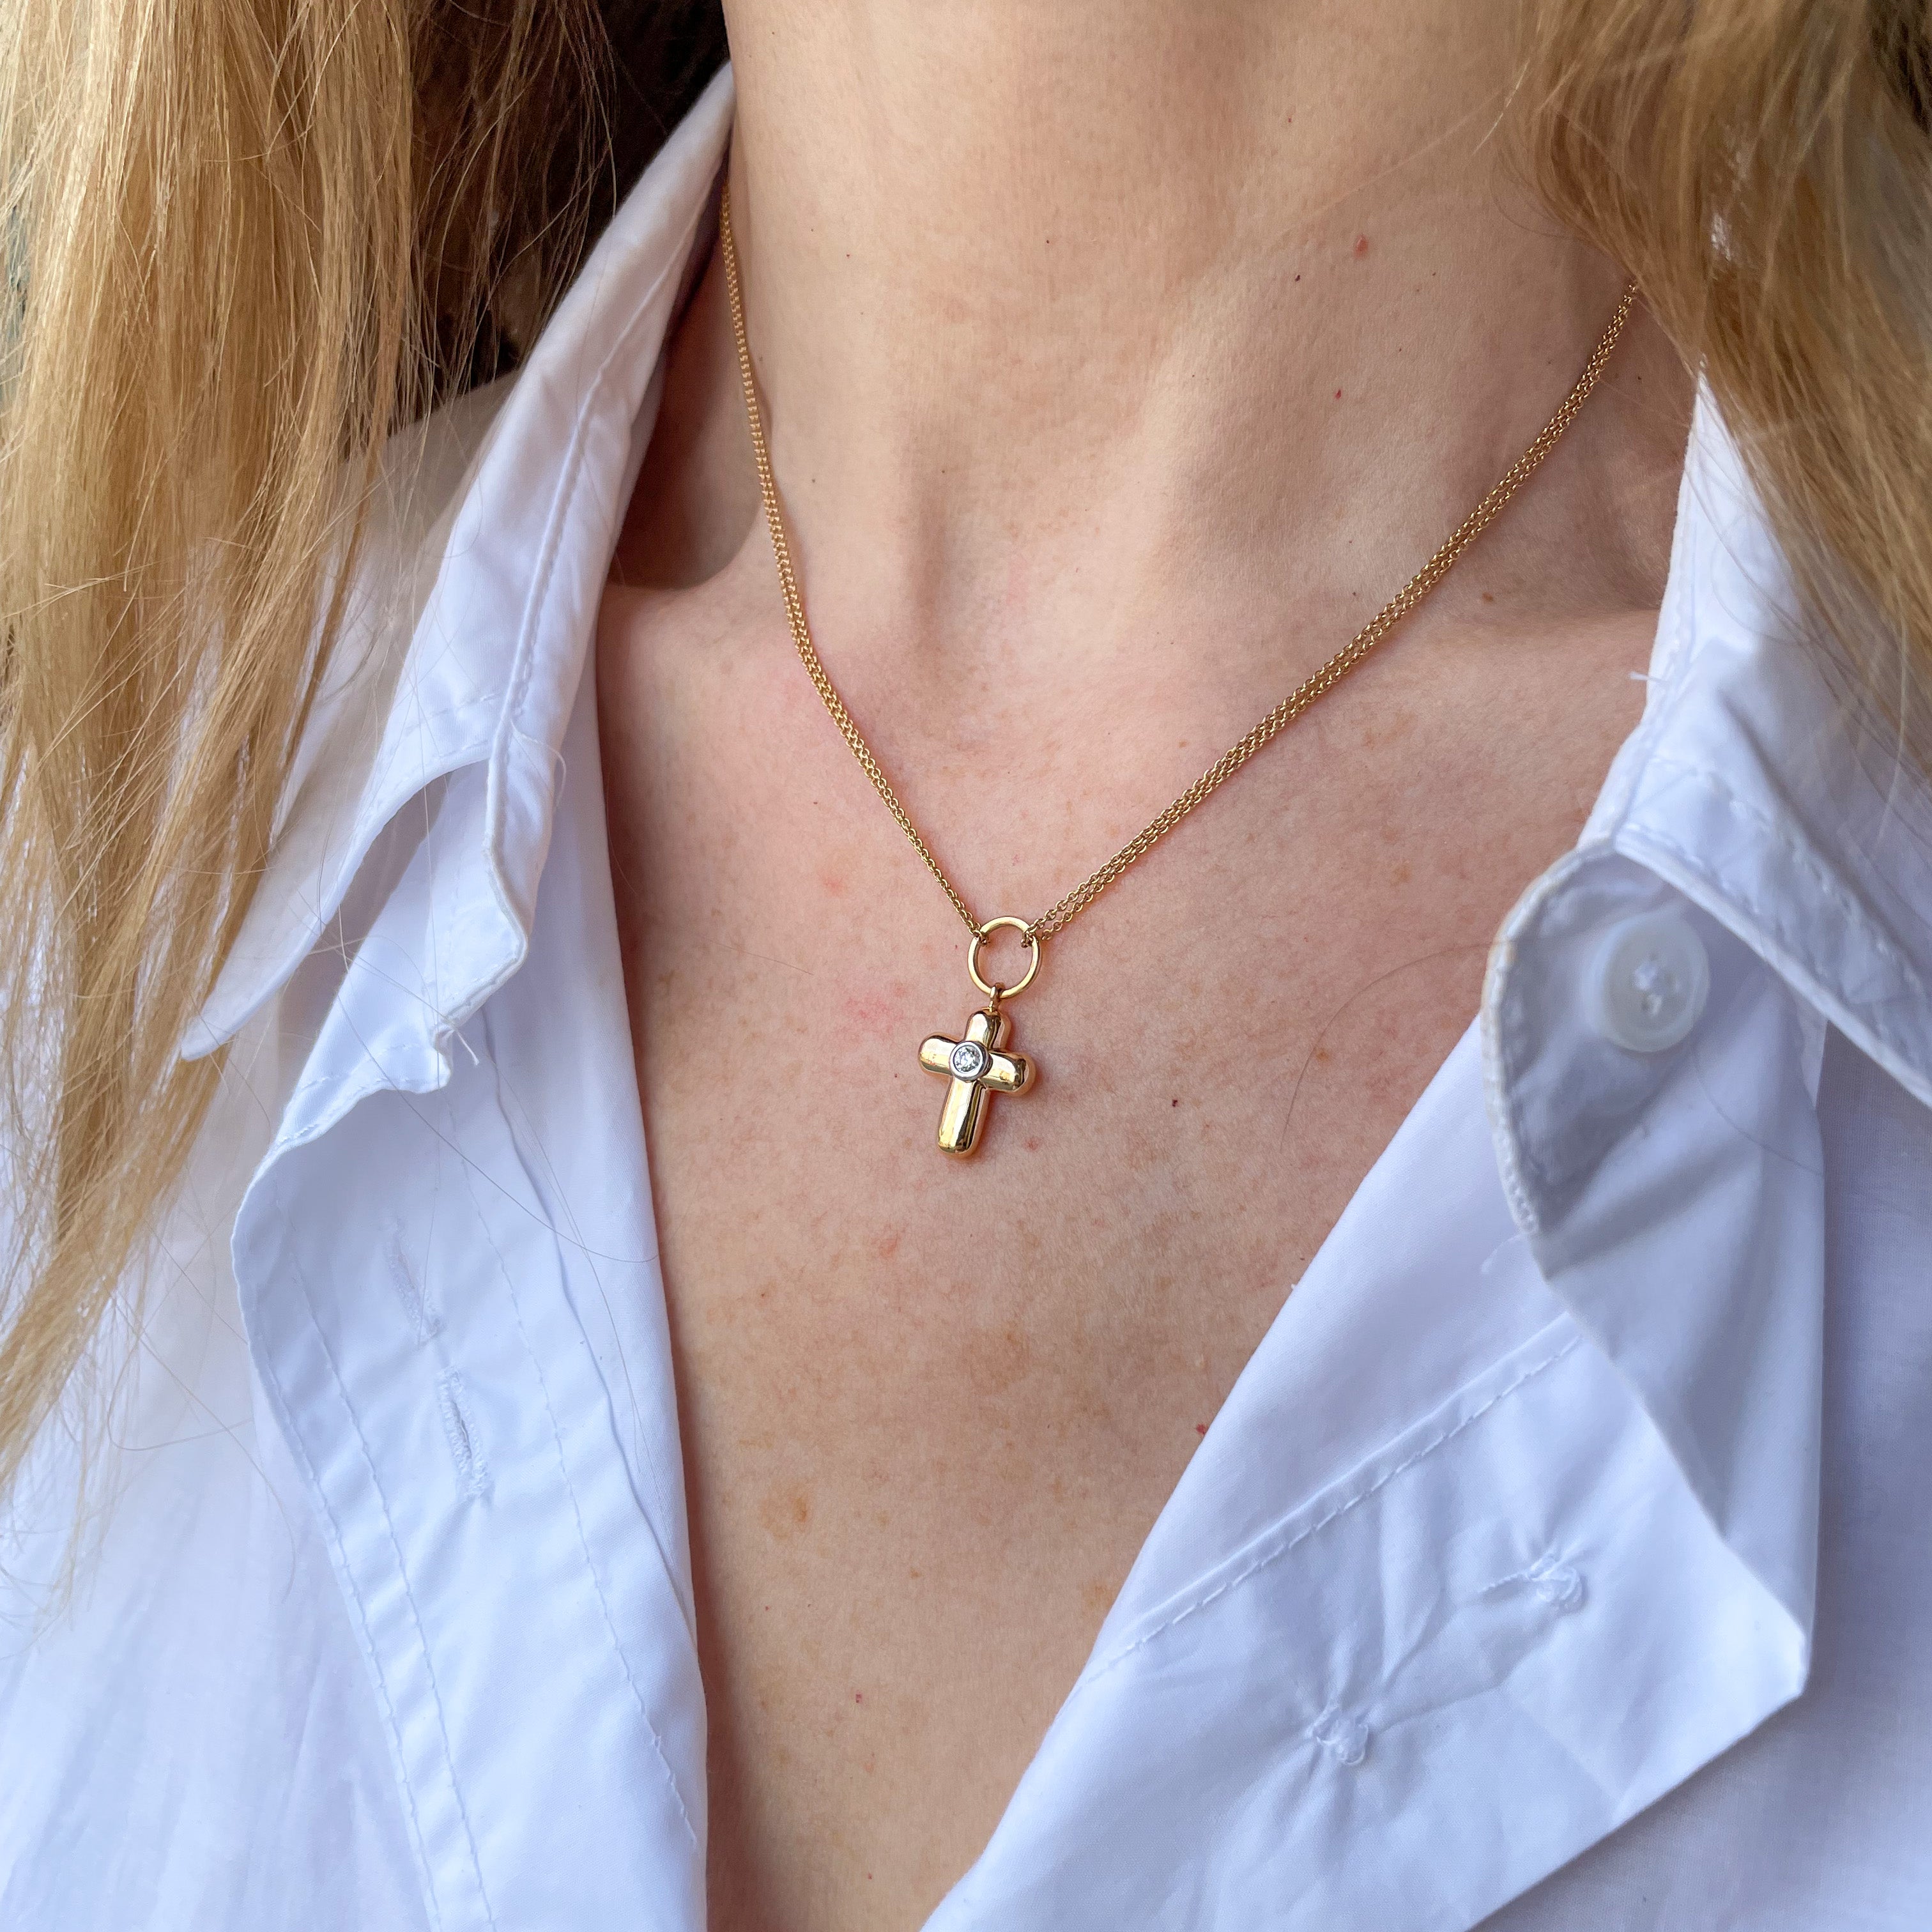 Child's Yellow Gold Cross Pendant Necklace | REEDS Jewelers